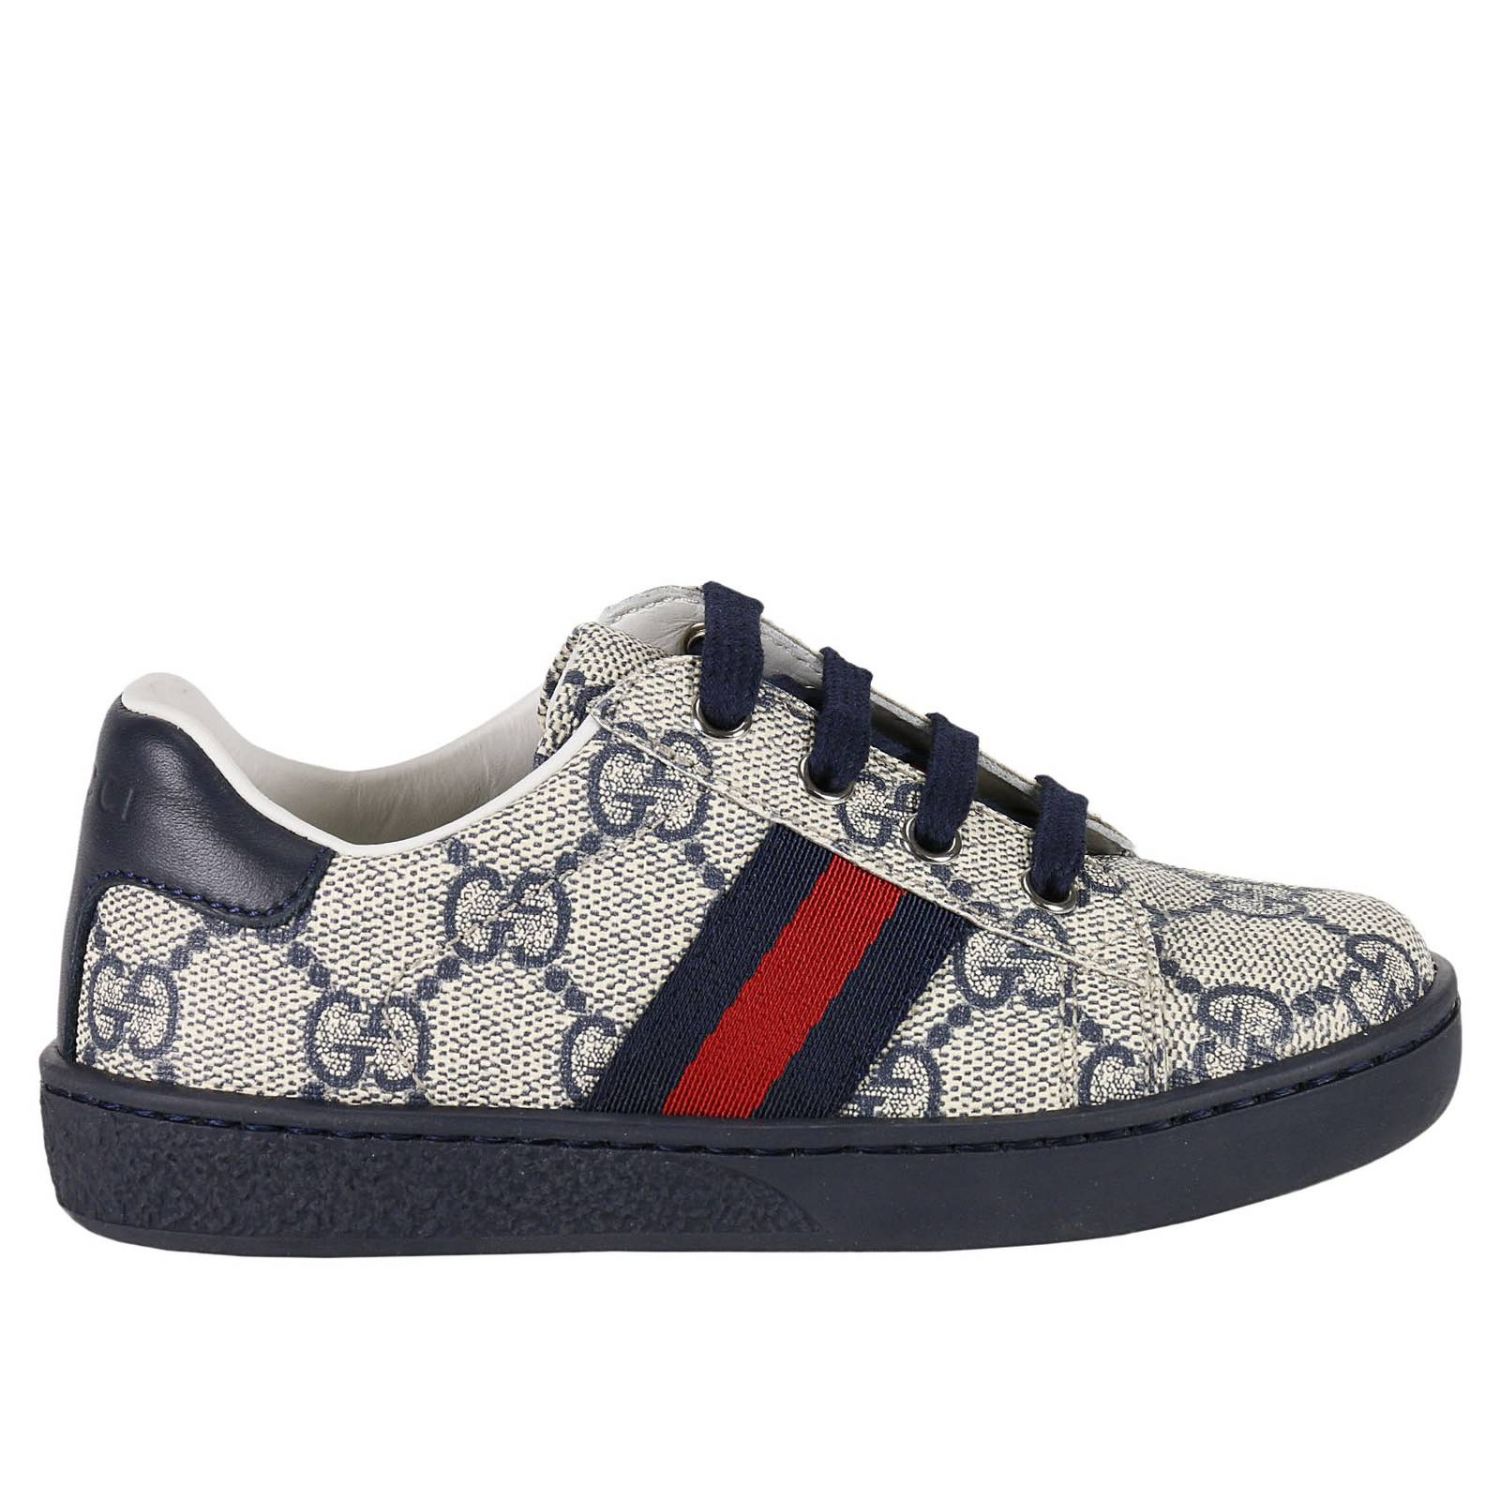 Shoes Gucci Kids | Shoes Kids Gucci 433147 9C210 Giglio EN